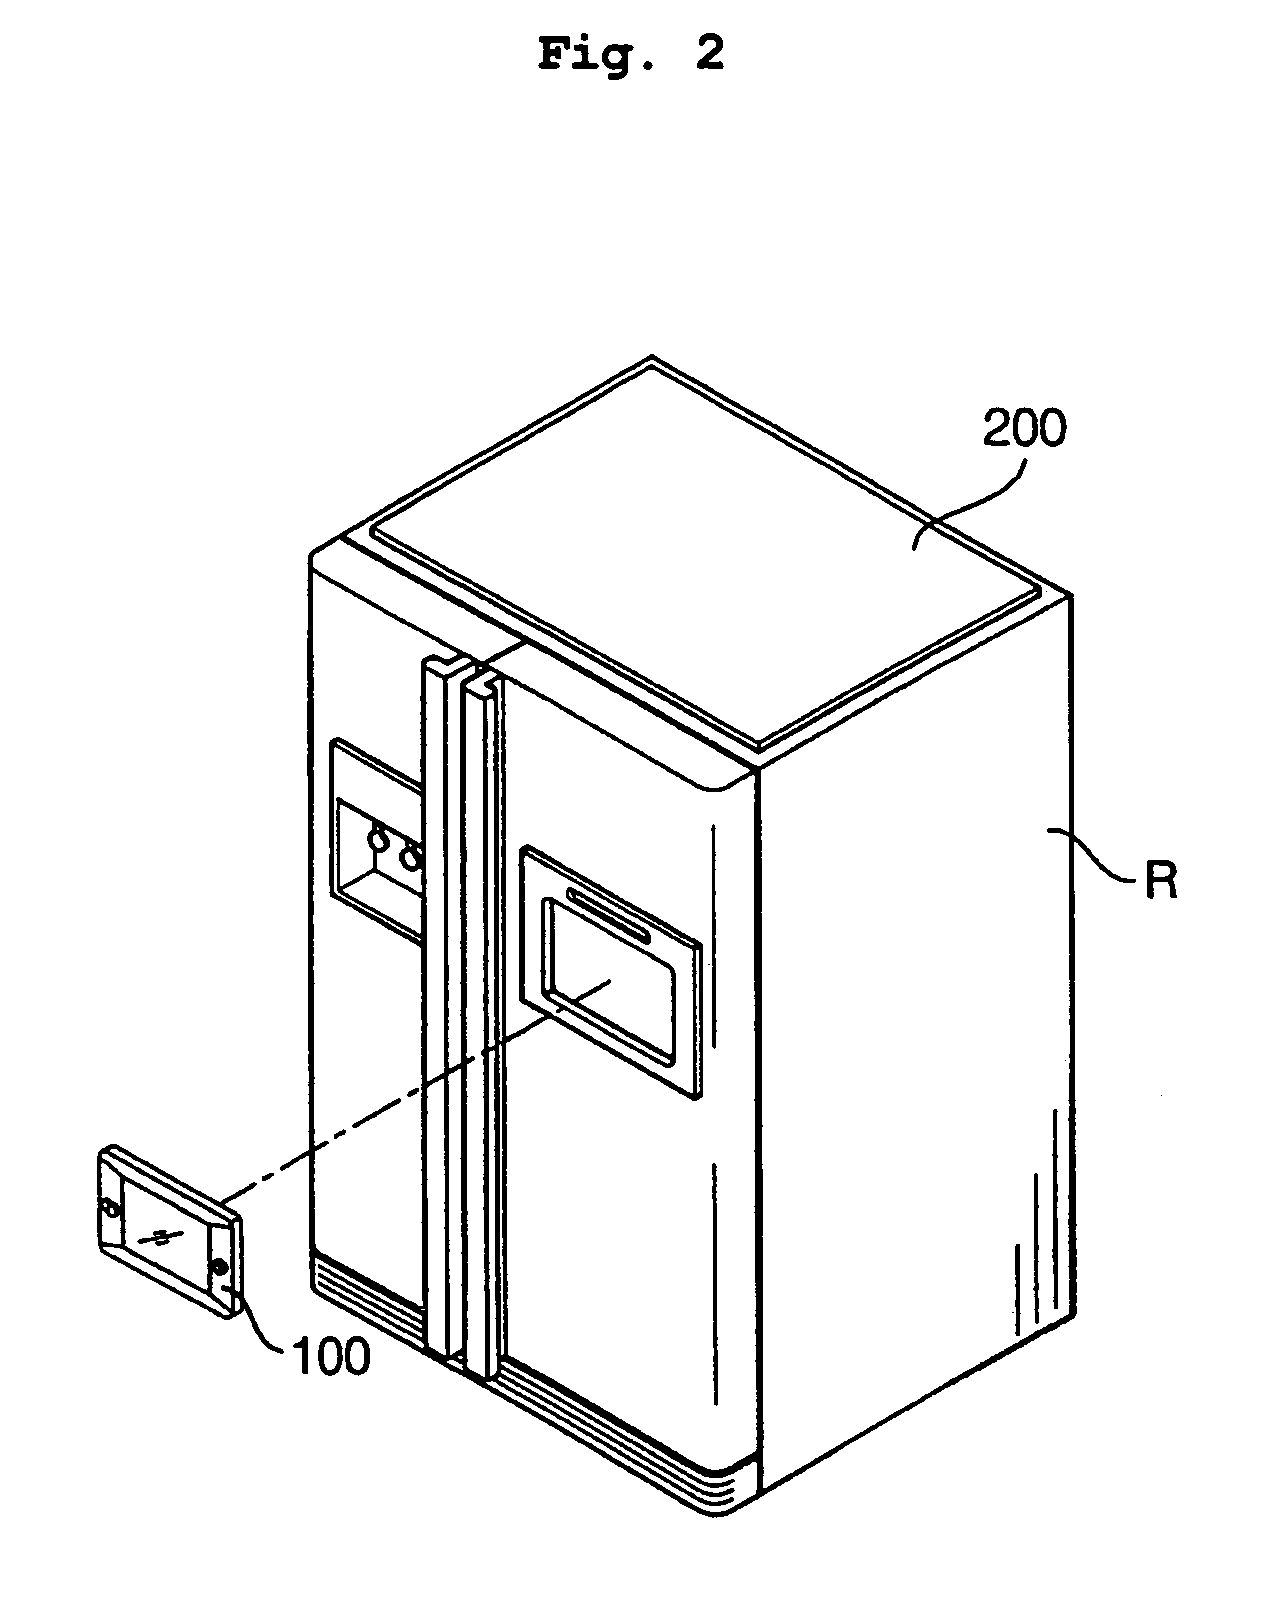 Internet refrigerator with web pad and method for operating the same